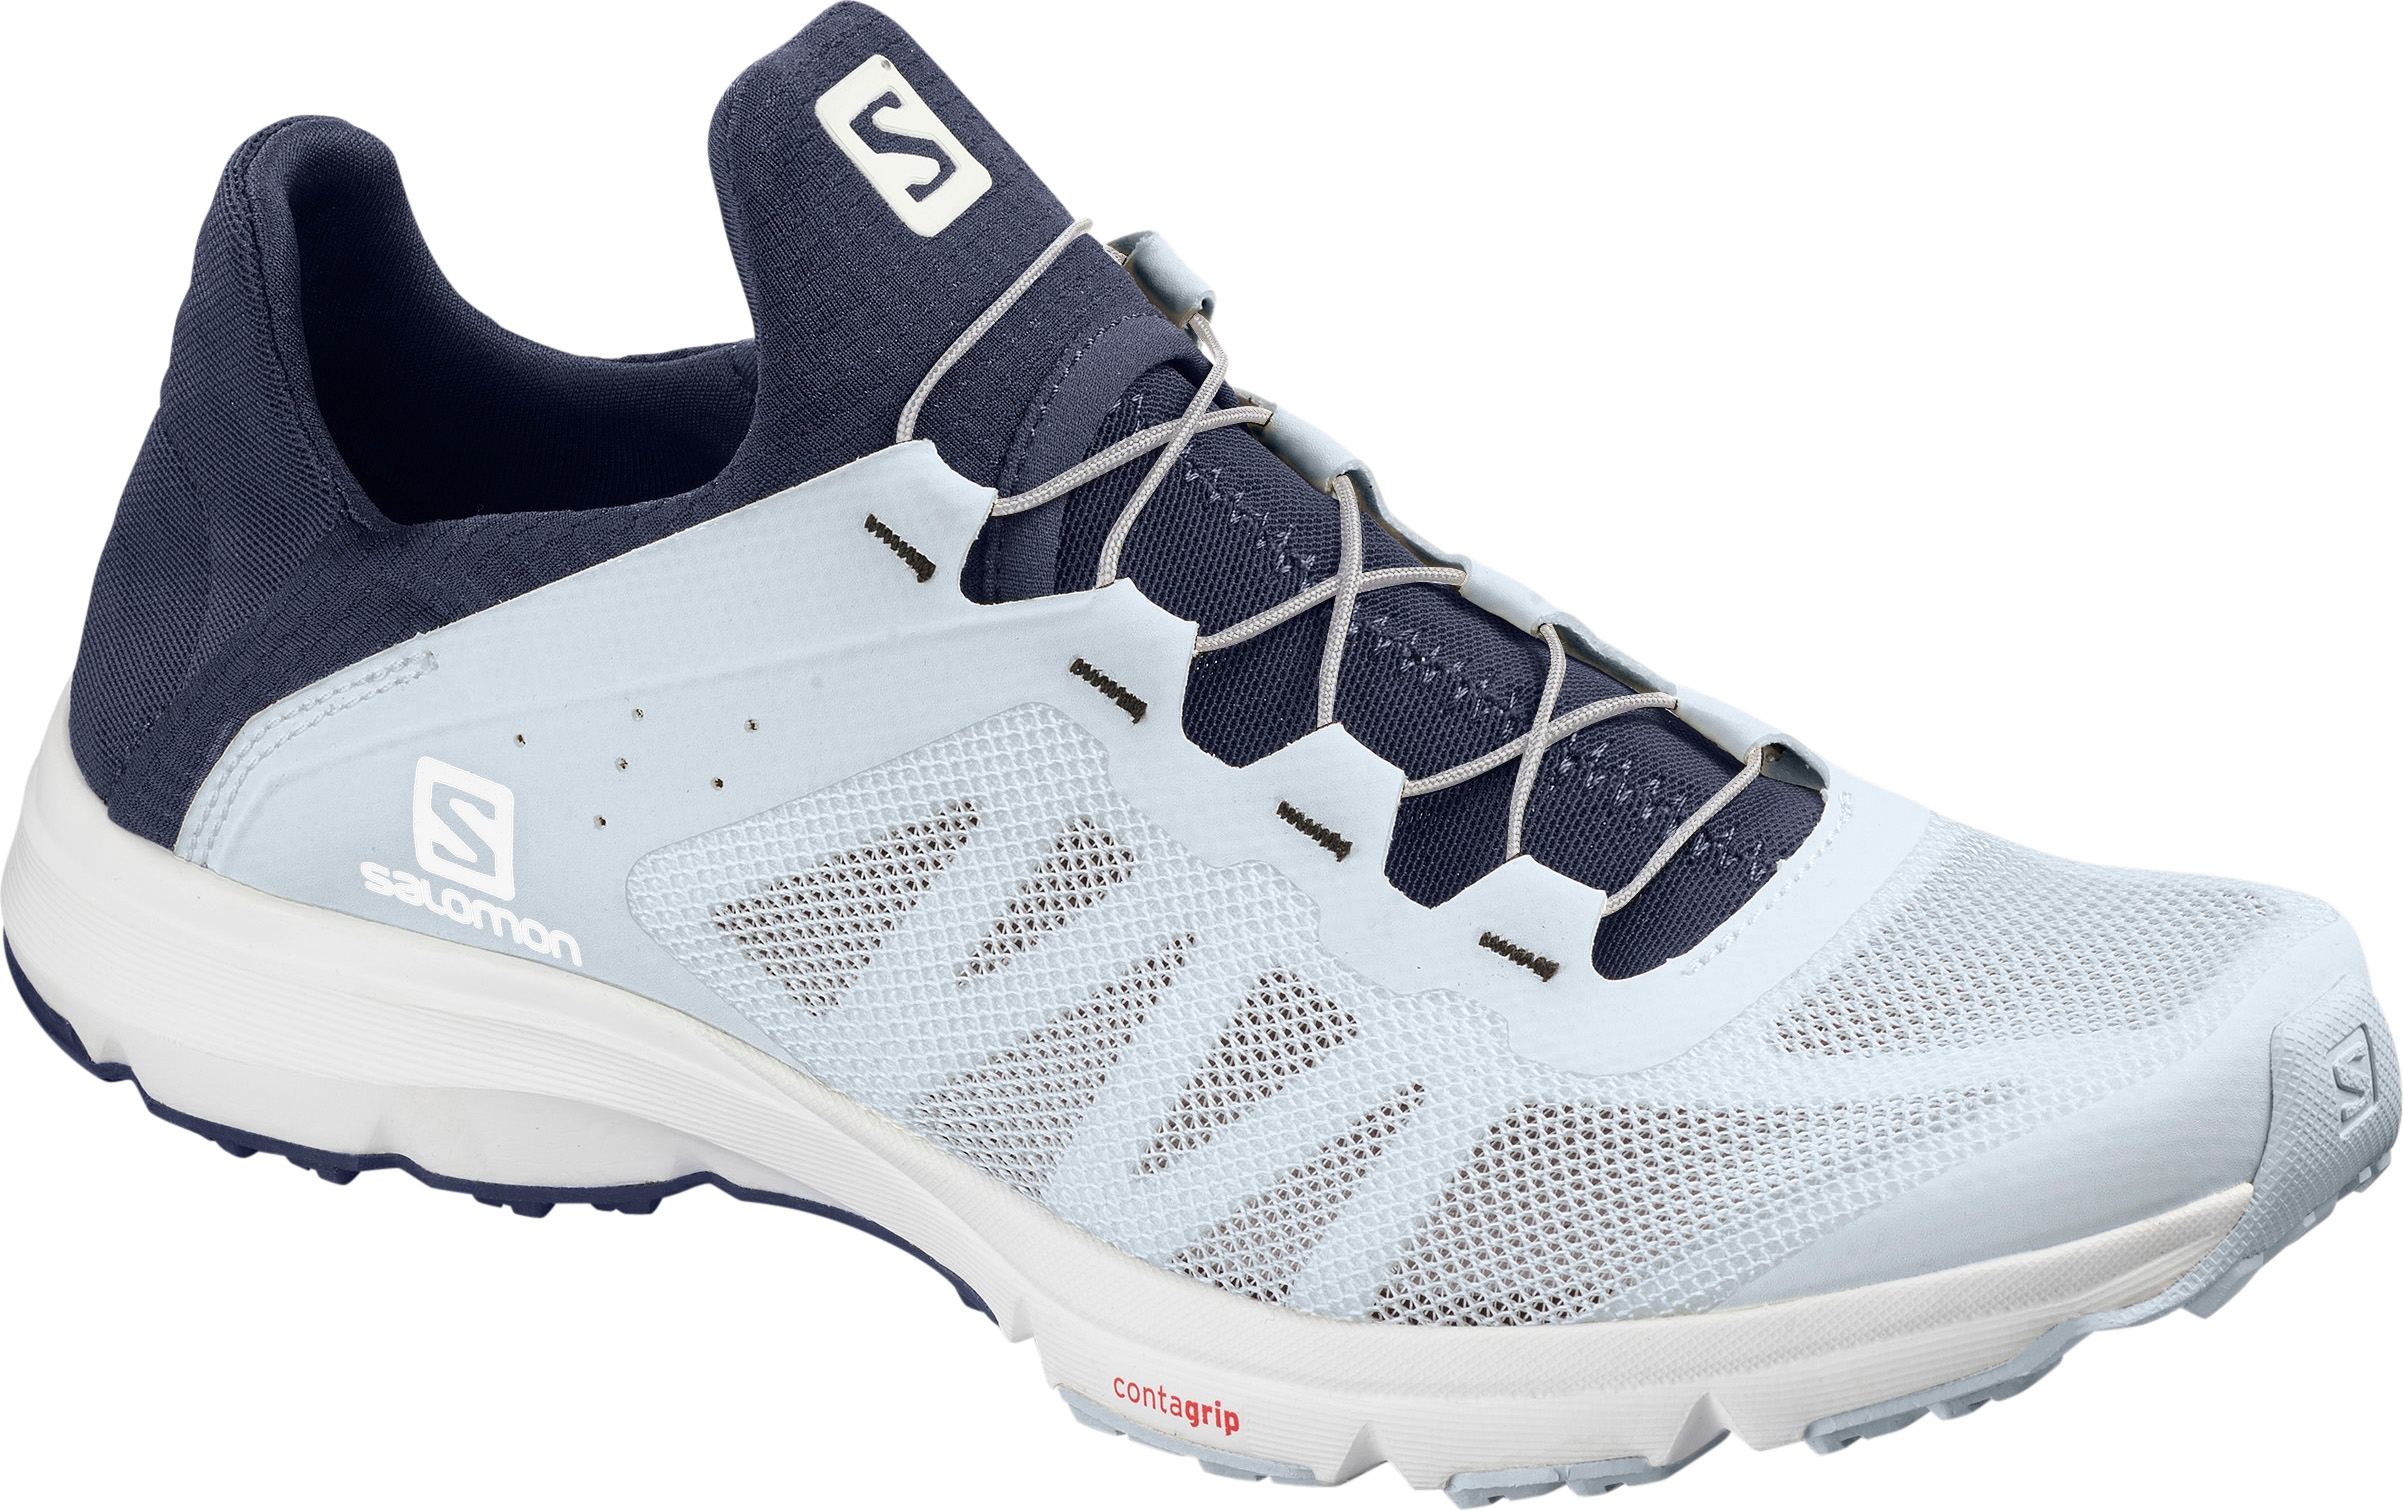 womens white water shoes